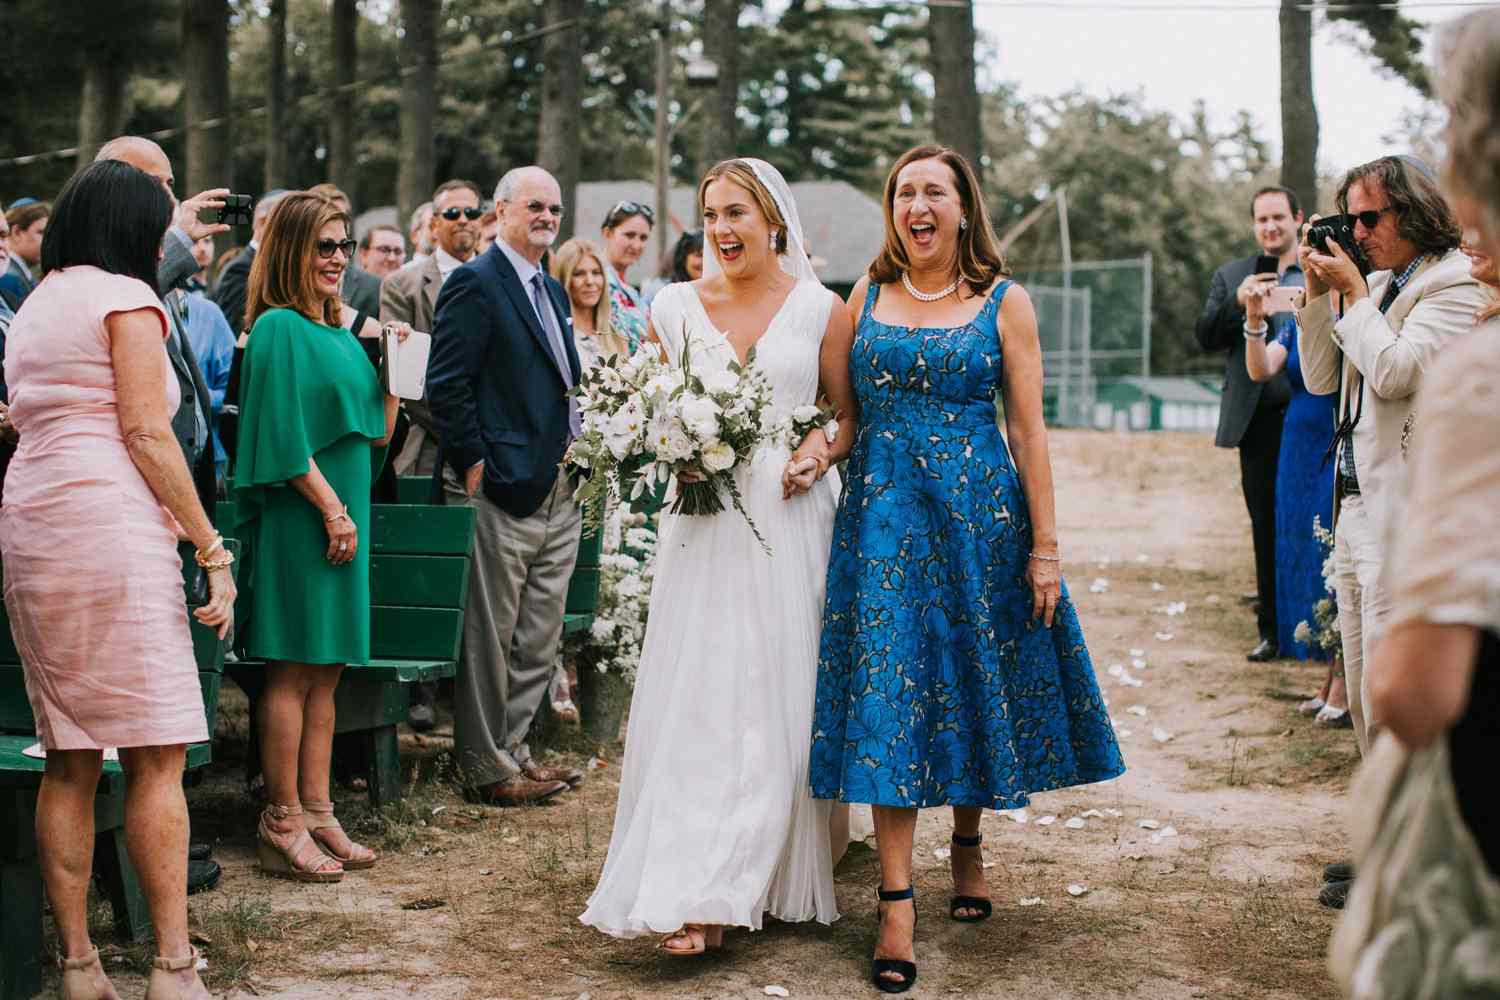 Mother-of-Bride and-Groom Dresses for a Summer Wedding | Martha Stewart